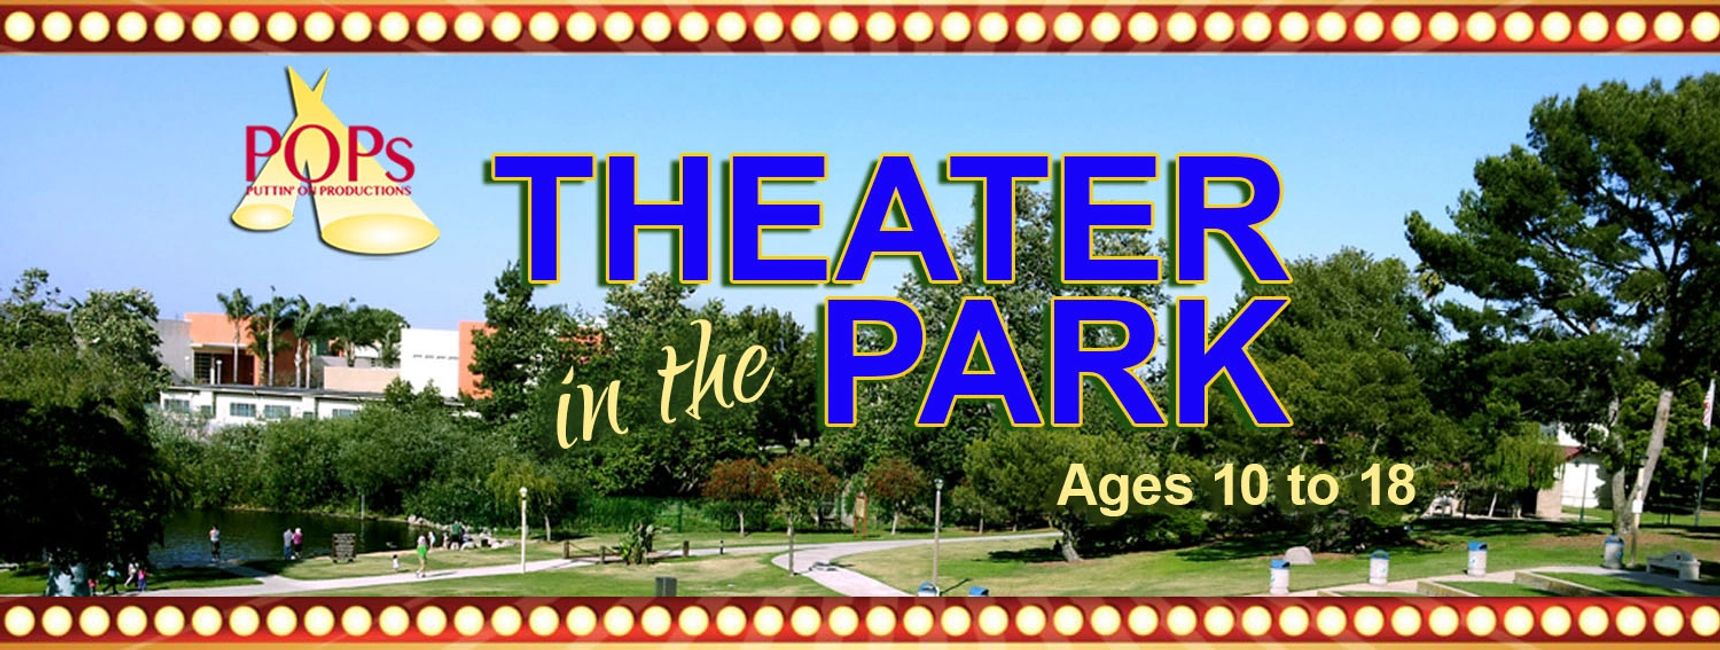 Theater in the Park Puttin' On Productions (POPs)